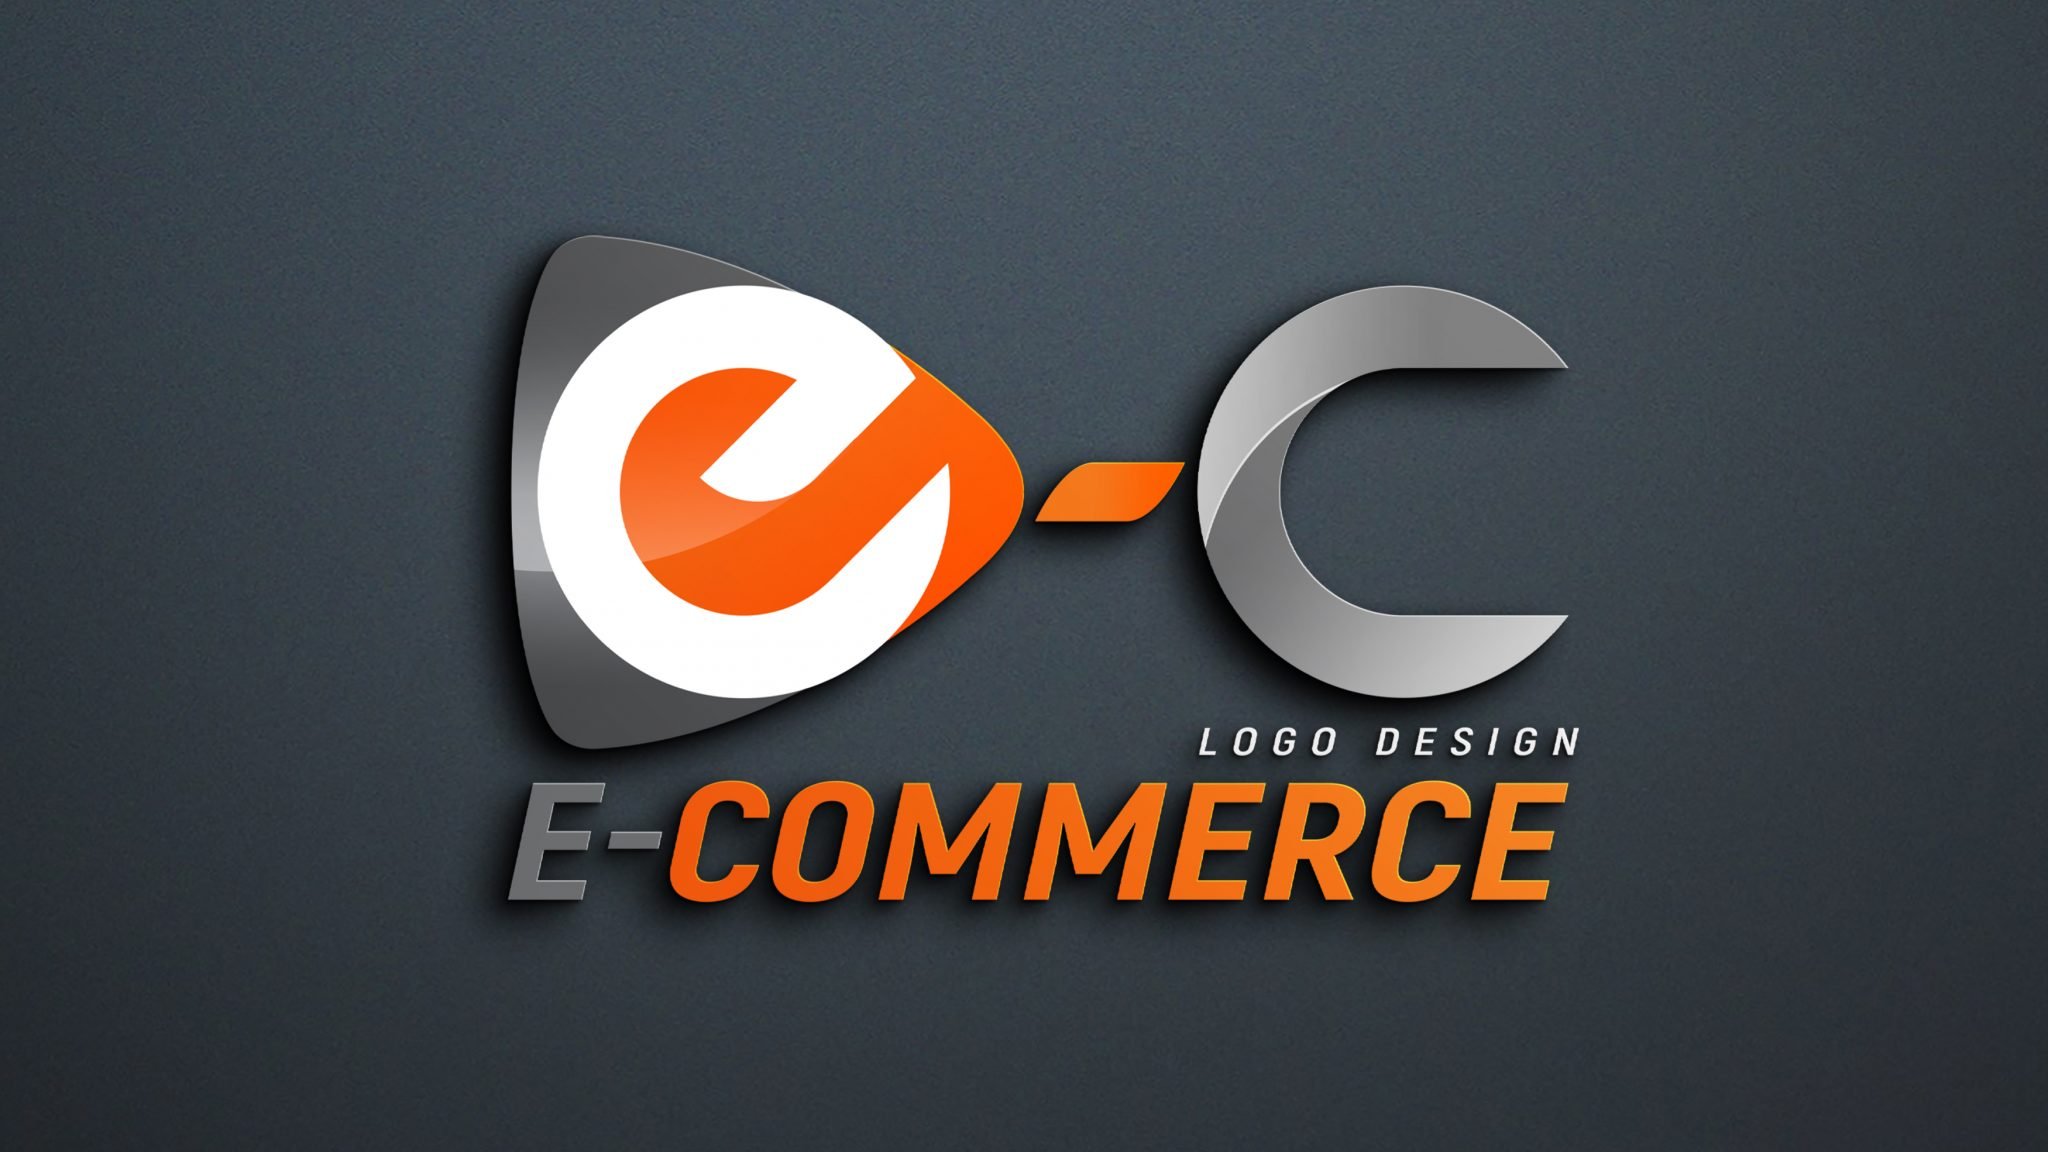 E-commerce Logo Design PSD – GraphicsFamily: The #1 marketplace for